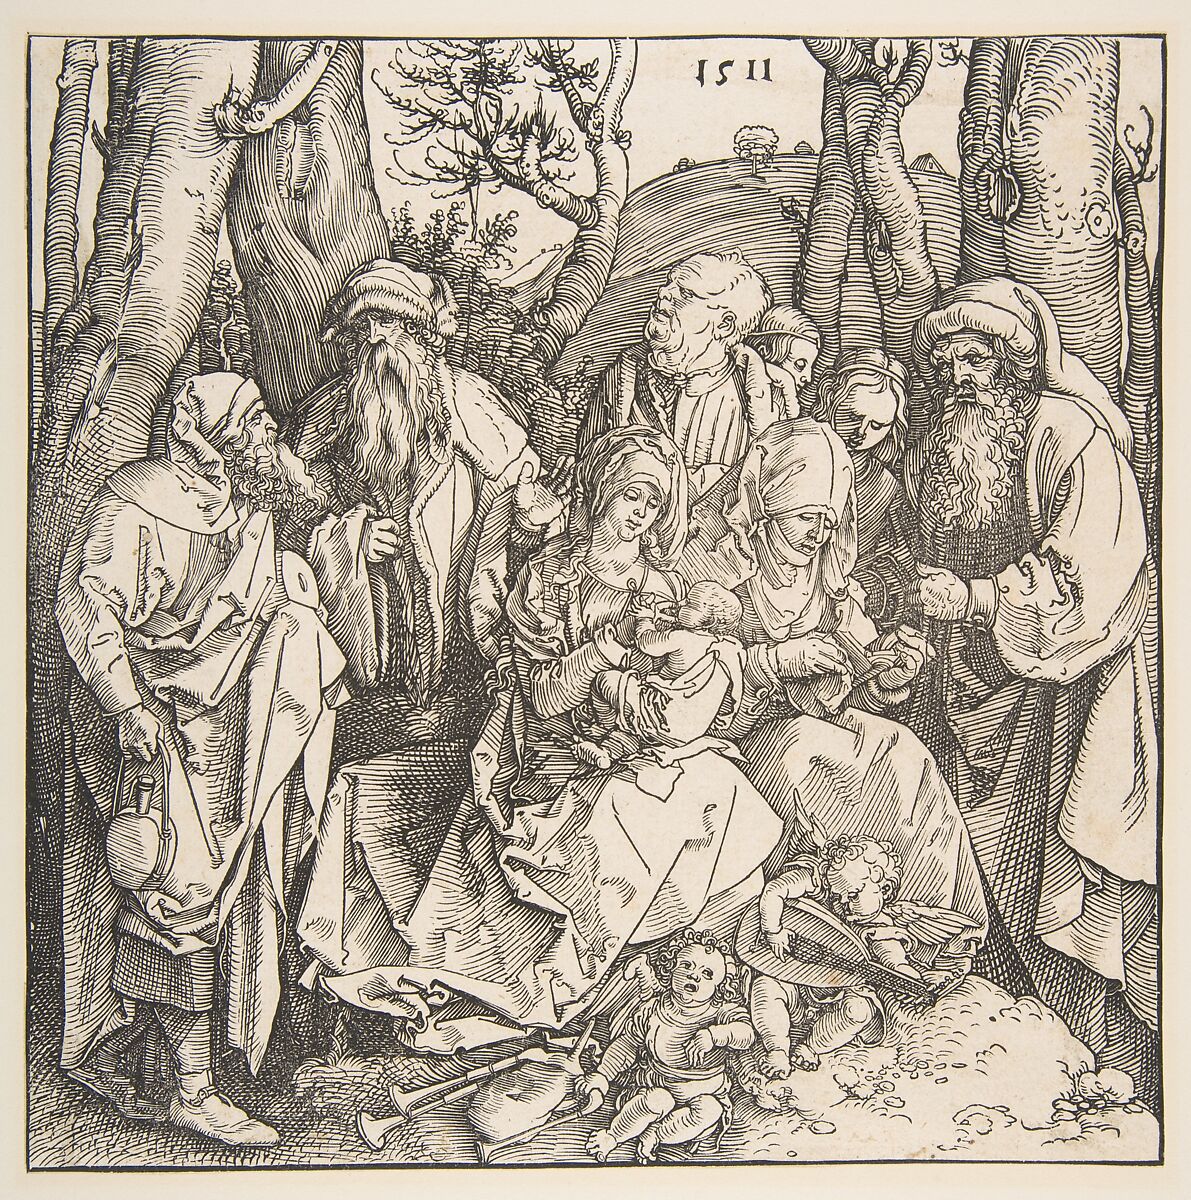 The Holy Family with Saints and Two Musical Angels, Albrecht Dürer (German, Nuremberg 1471–1528 Nuremberg), Woodcut 